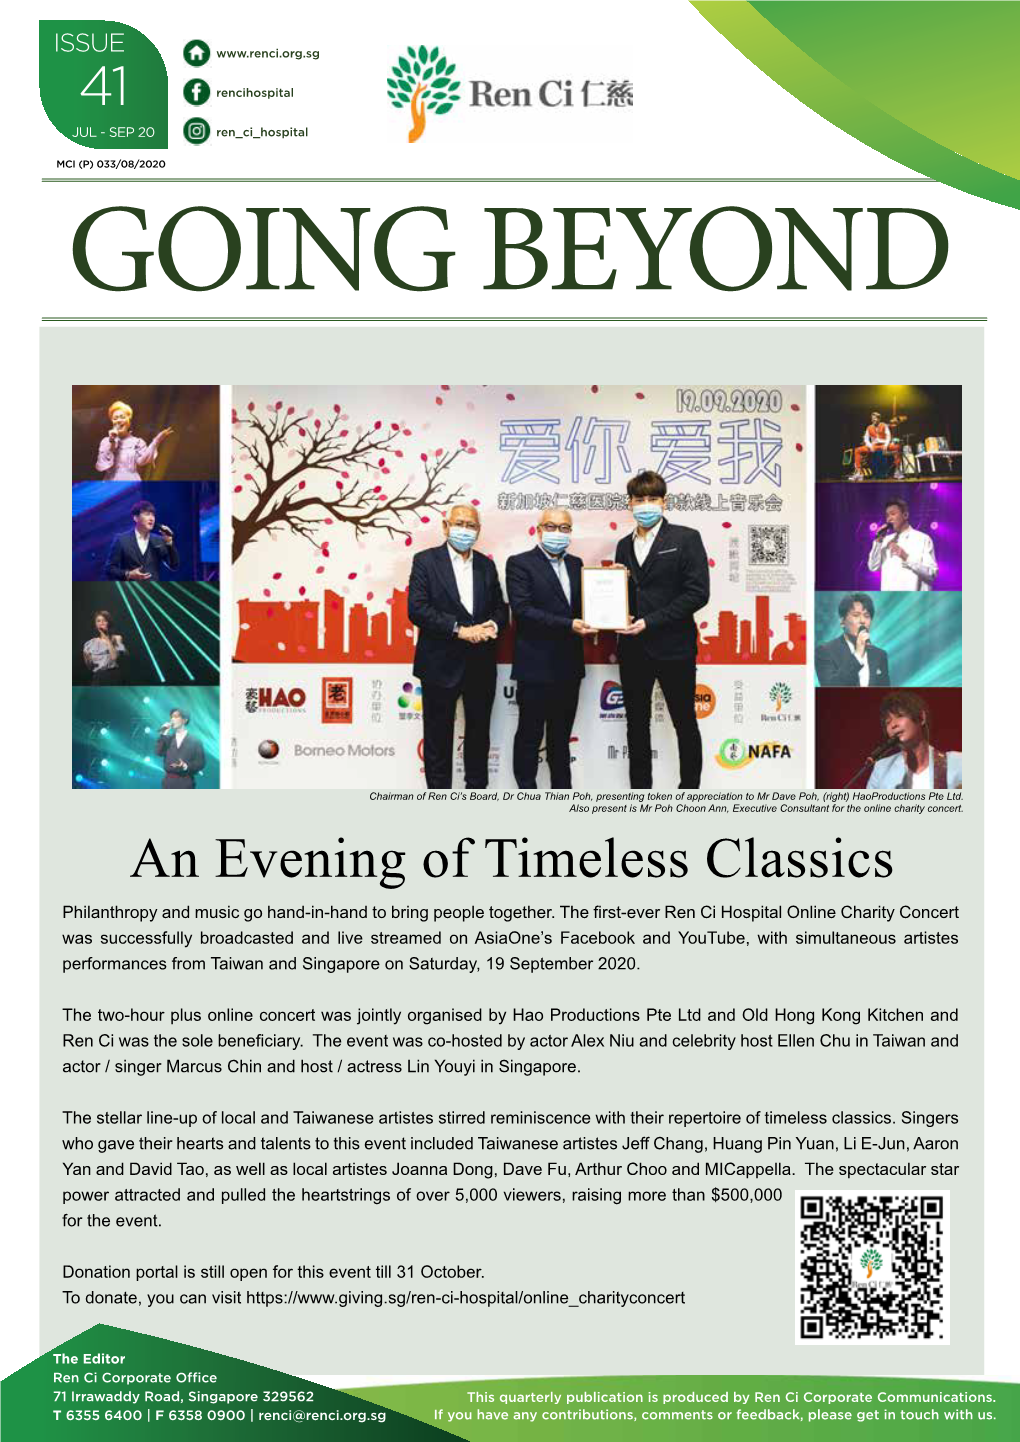 An Evening of Timeless Classics Philanthropy and Music Go Hand-In-Hand to Bring People Together